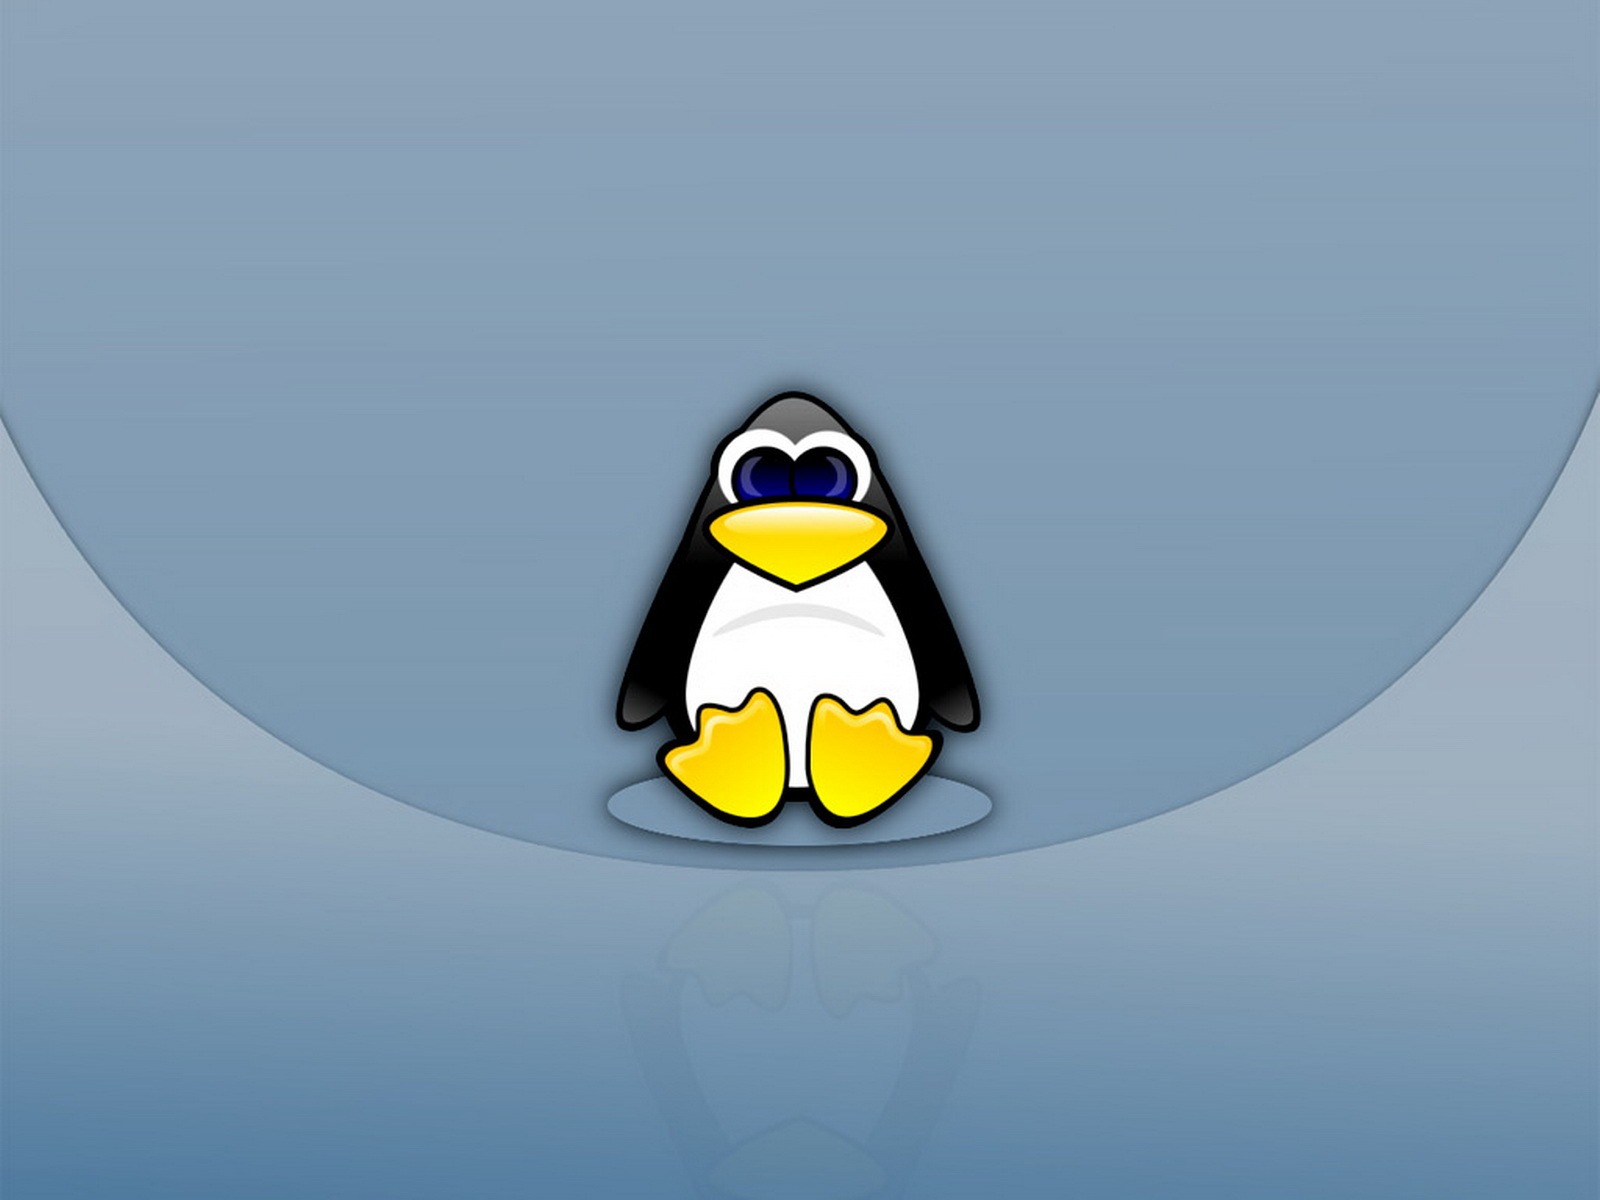 Linux tapety (3) #4 - 1600x1200